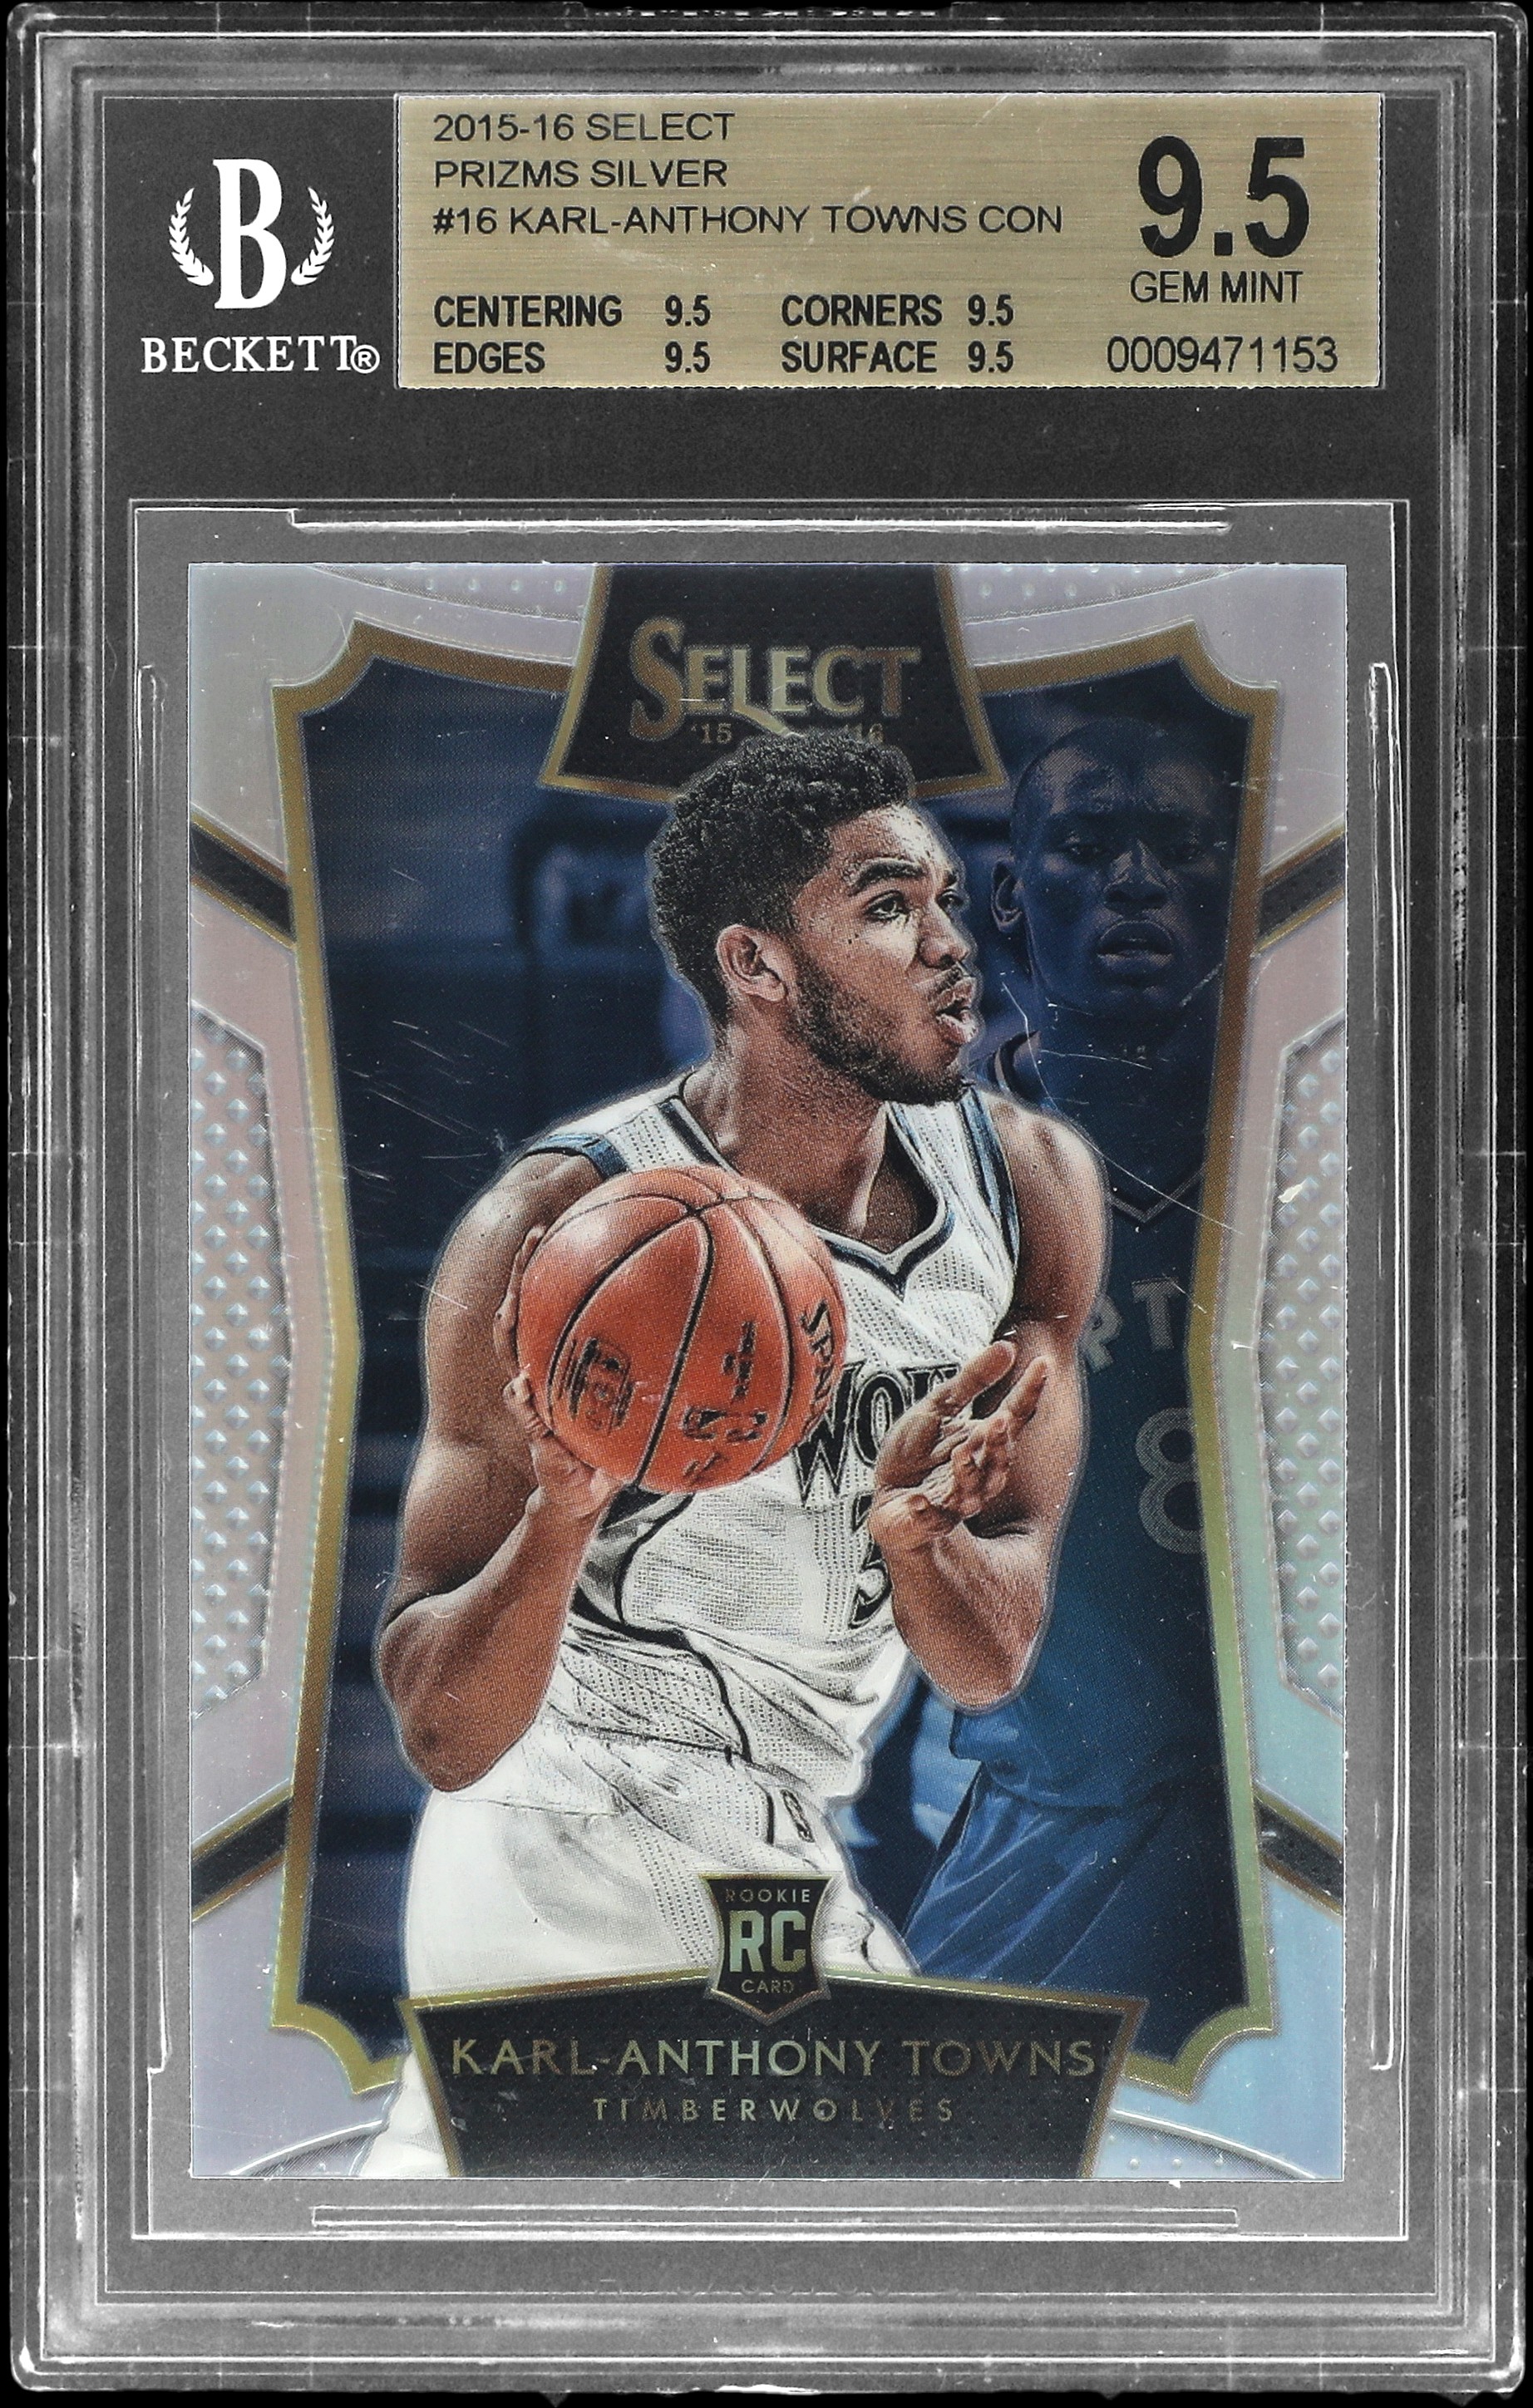 2015-16 Panini Select Prizms Silver #16 Karl-Anthony Towns Rookie Card – BGS GEM MINT 9.5